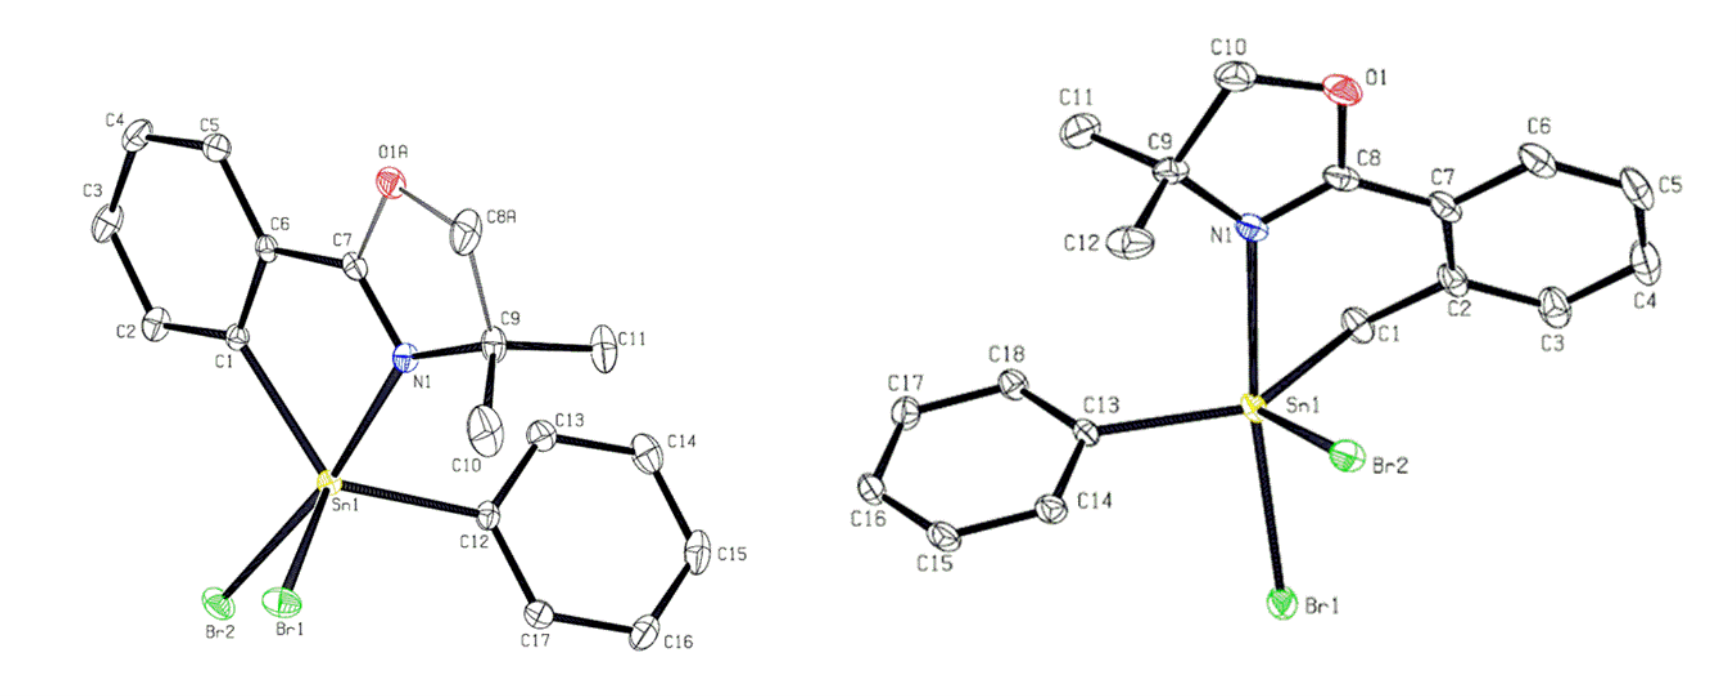 Crystal structures of two oxazoline polystannanes